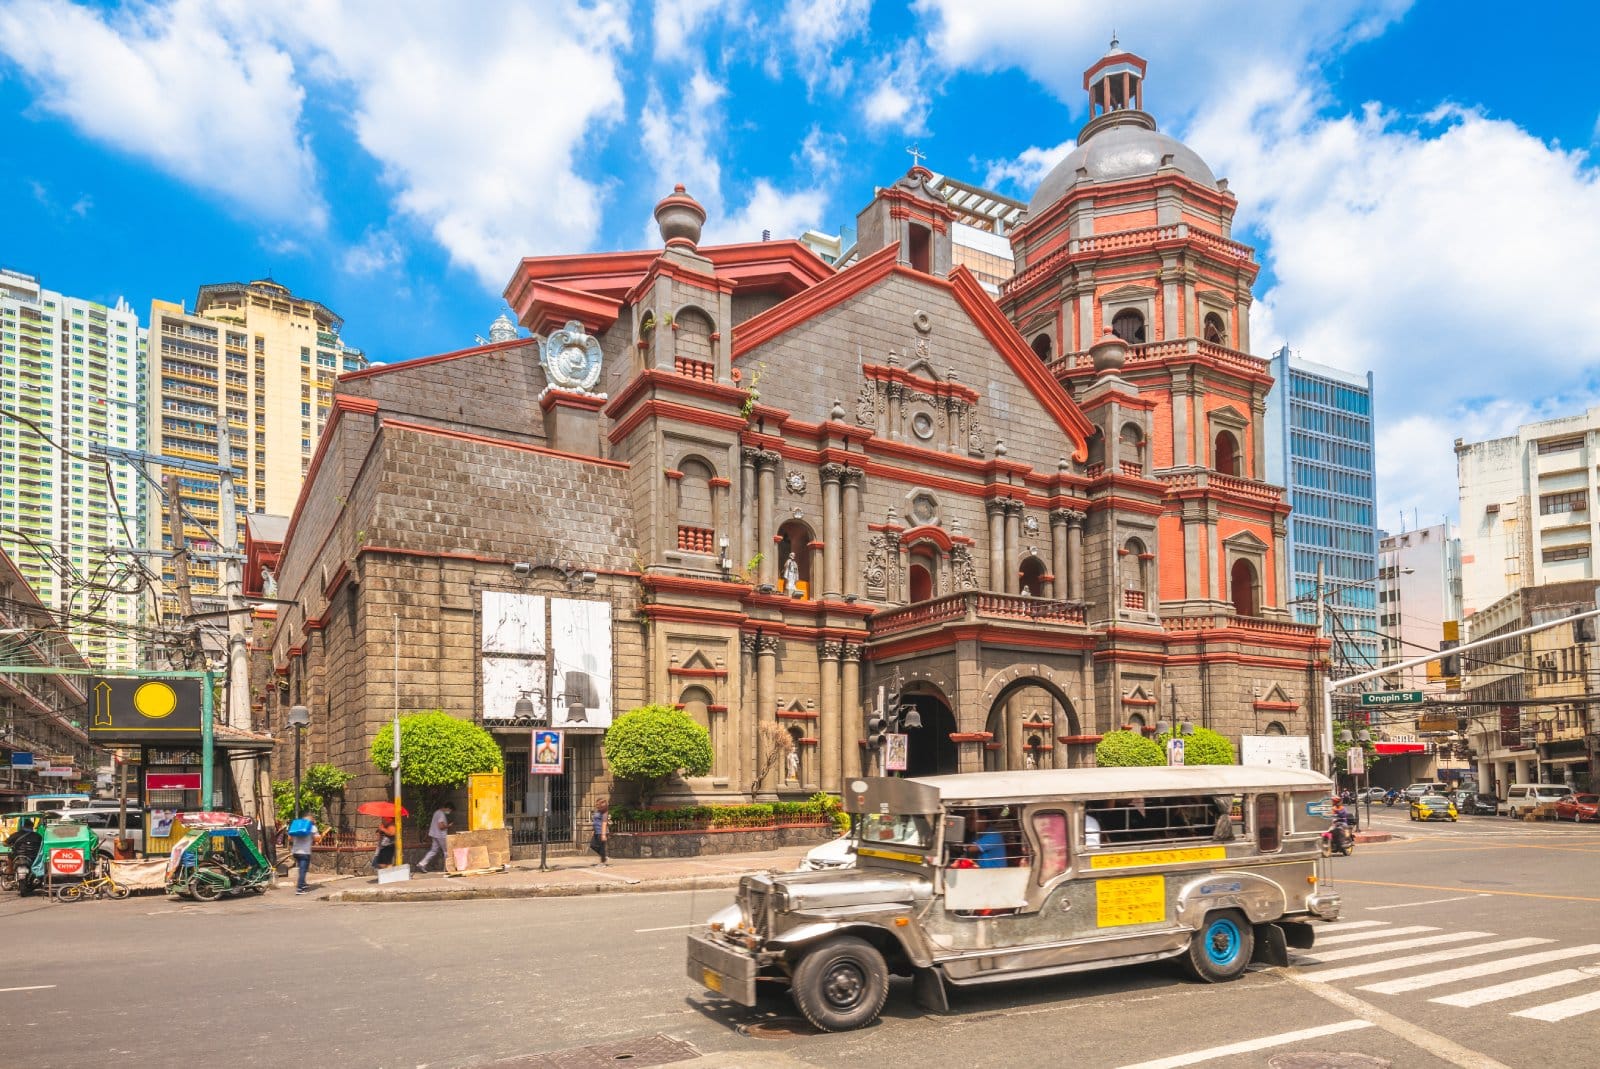 <p class="wp-caption-text">Image Credit: Shutterstock / Richie Chan</p>  <p><span>The history of Manila reflects the country’s complex past, marked by diverse influences from indigenous, Asian, and Western cultures. </span></p> <p><span>Before the arrival of Spanish explorers in the 16th century, Manila was a thriving settlement by the bay, inhabited by various indigenous groups. The area was known for its strategic trading position, facilitating commerce among local tribes and traders from China, India, and the Islamic sultanates of Southeast Asia. The Pasig River, which flows through Manila, was vital for trade and transportation.</span></p> <p><span>Manila’s history as a colonial city began in 1571 when Spanish conquistador Miguel López de Legazpi declared it the capital of the Spanish East Indies. The Spaniards fortified the city by constructing Intramuros, a walled city that served as the administrative and religious center. Manila became a pivotal point in the Galleon Trade, linking Asia with the Americas. The city’s port facilitated the exchange of goods such as silk, spices, silver, and other valuable commodities, making it one of the world’s first global cities.</span></p> <p><span>The Spanish period also saw the introduction of Christianity, the establishment of the Philippines’ oldest universities, and the construction of iconic churches. However, this era was also marked by social inequalities, uprisings, and challenges to Spanish rule.</span></p> <p><span>Following the Spanish-American War, the Treaty of Paris (1898) ceded the Philippines to the United States. Manila underwent significant changes under American rule, including introducing public education, public health, and infrastructure improvements, as well as the expansion of the city beyond the walls of Intramuros. The Americans established a new government structure and promoted democratic ideals, although full independence was not immediately granted.</span></p> <p><span>World War II brought devastation to Manila, particularly during the Battle of Manila in 1945, which resulted in extensive destruction and loss of life. The city was one of World War II’s most heavily damaged Allied capitals.</span></p> <p><span>The Philippines gained independence on July 4, 1946, with Manila being declared the capital of the newly sovereign nation. The post-war period was a time of rebuilding and modernization. Under the leadership of various presidents, Manila saw the construction of new roads, buildings, and cultural landmarks. The city was central to the country’s political, social, and economic life.</span></p> <p><span>The declaration of Martial Law in 1972 by President Ferdinand Marcos led to a period of political repression and violence. Manila was the center of opposition against the Marcos regime, culminating in the People Power Revolution of 1986. This peaceful uprising, which took place along EDSA, a major thoroughfare in Metro Manila, restored democracy in the Philippines.</span></p> <p><span>Manila is a vibrant urban center, reflecting historical influences and modernity. It faces challenges such as traffic congestion, urban poverty, and environmental issues but remains a vital political, economic, and cultural hub in the Philippines. The city continues to evolve, striving to address the needs of its inhabitants while preserving its rich historical heritage.</span></p>